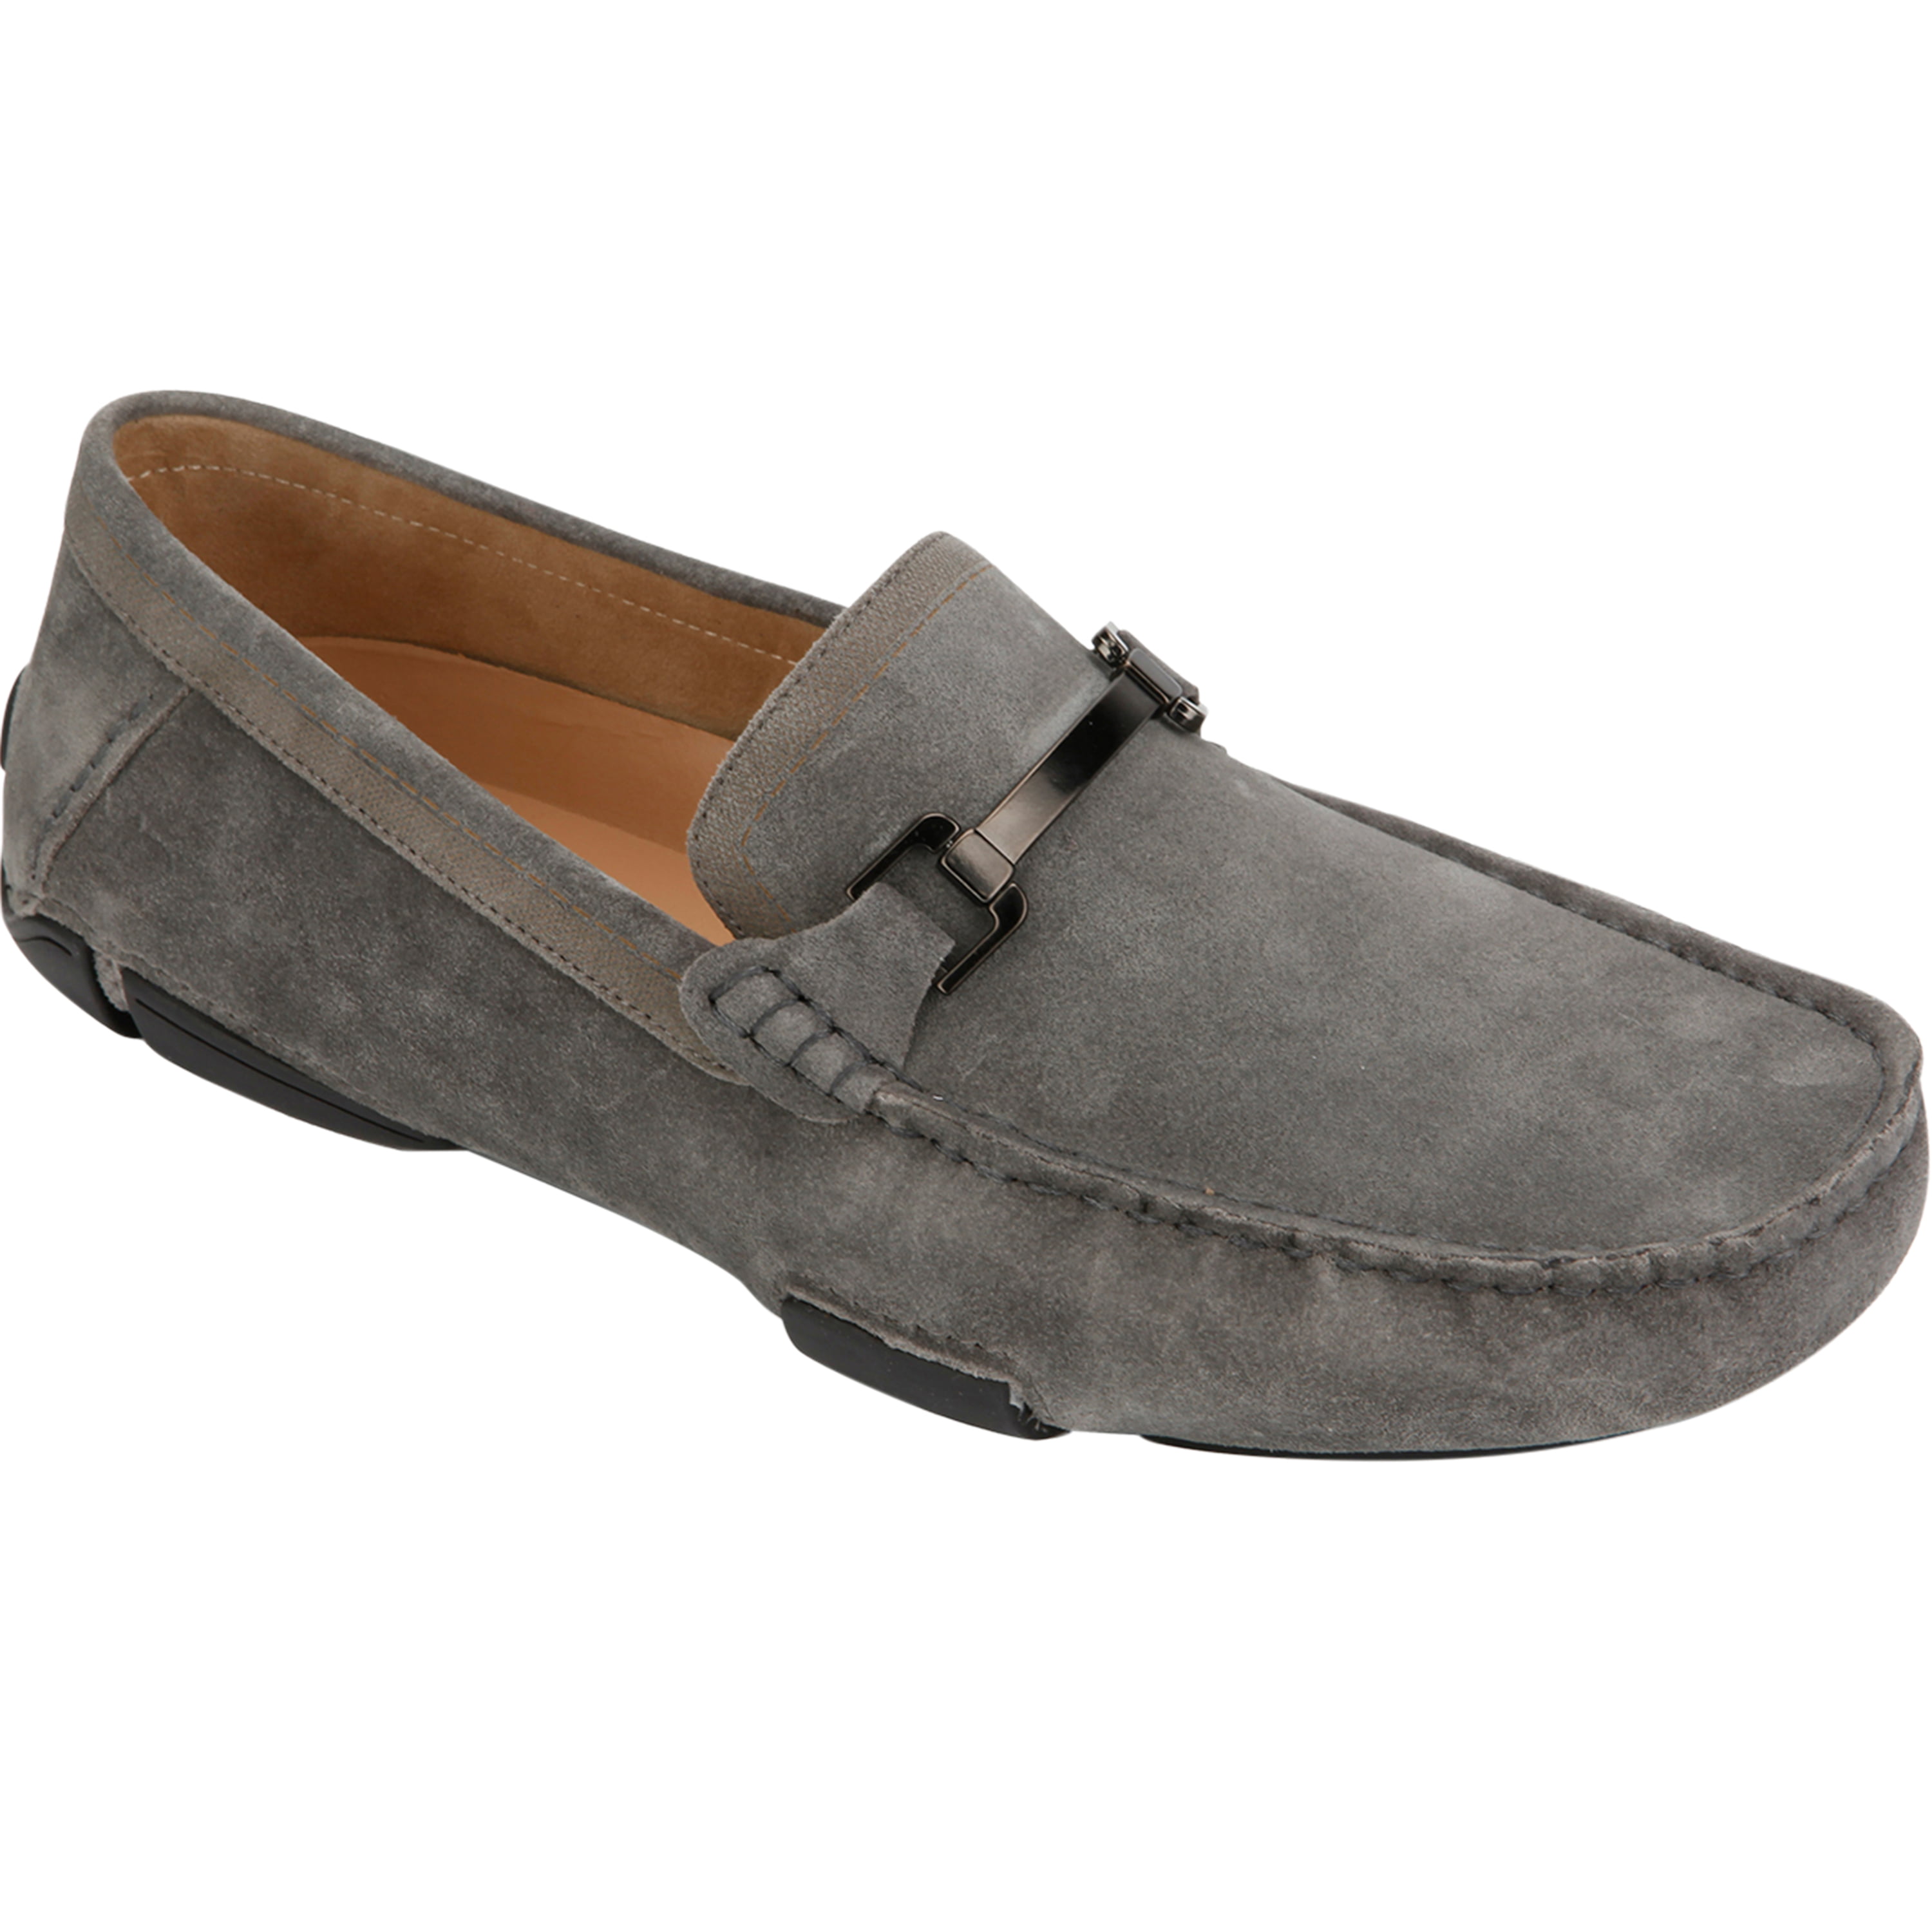 Driving Shoe Loafers Shoes 